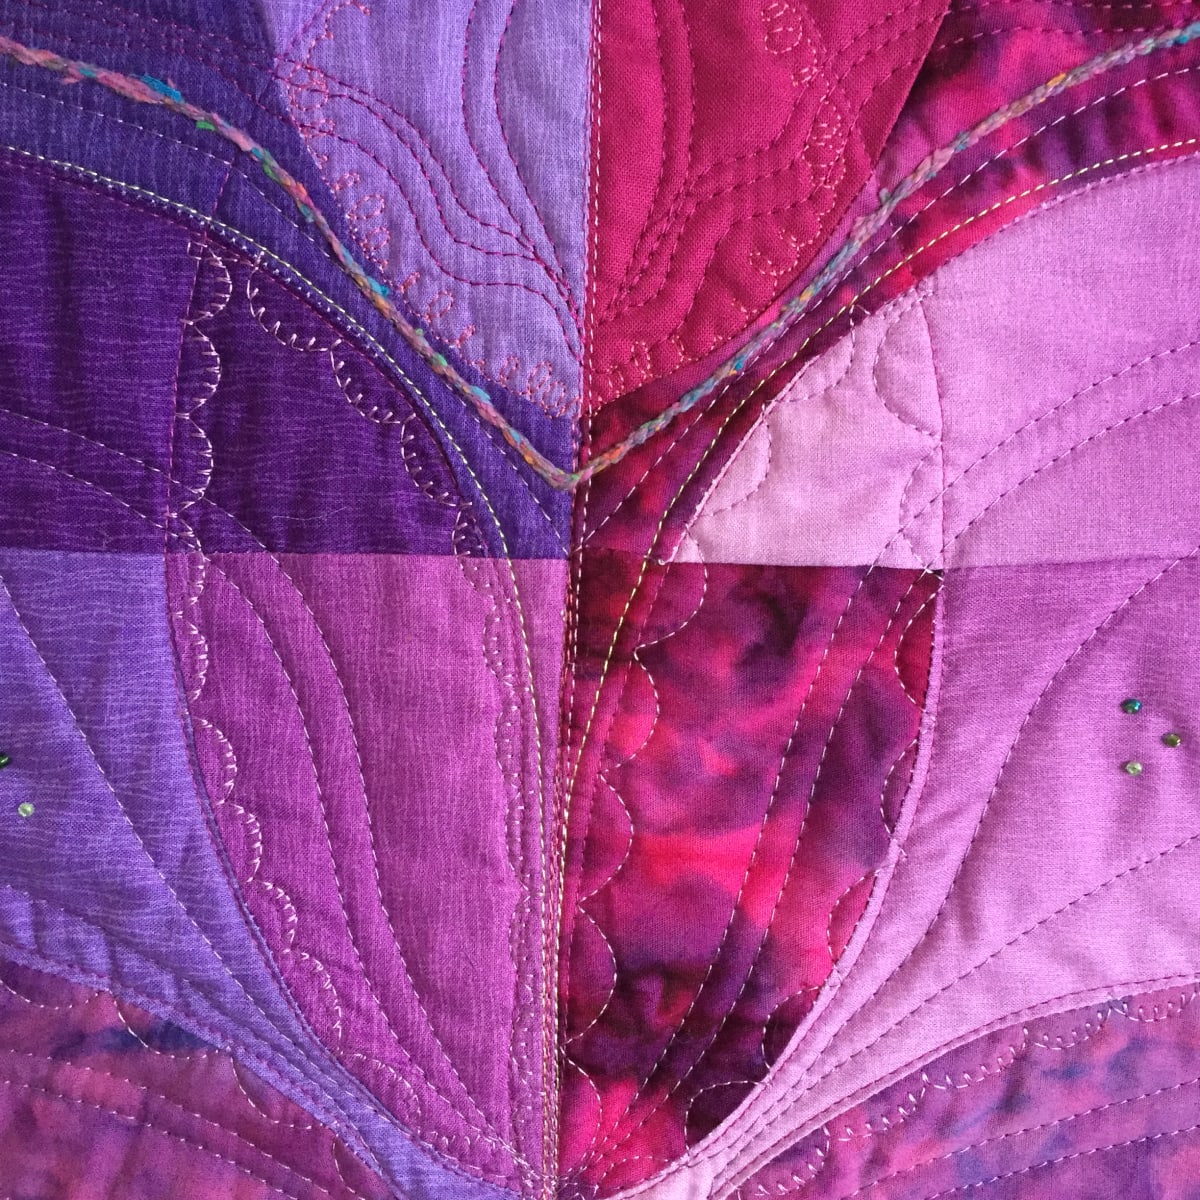 Lilac Abstraction by Julia Muench  Image: closeup on embroidery